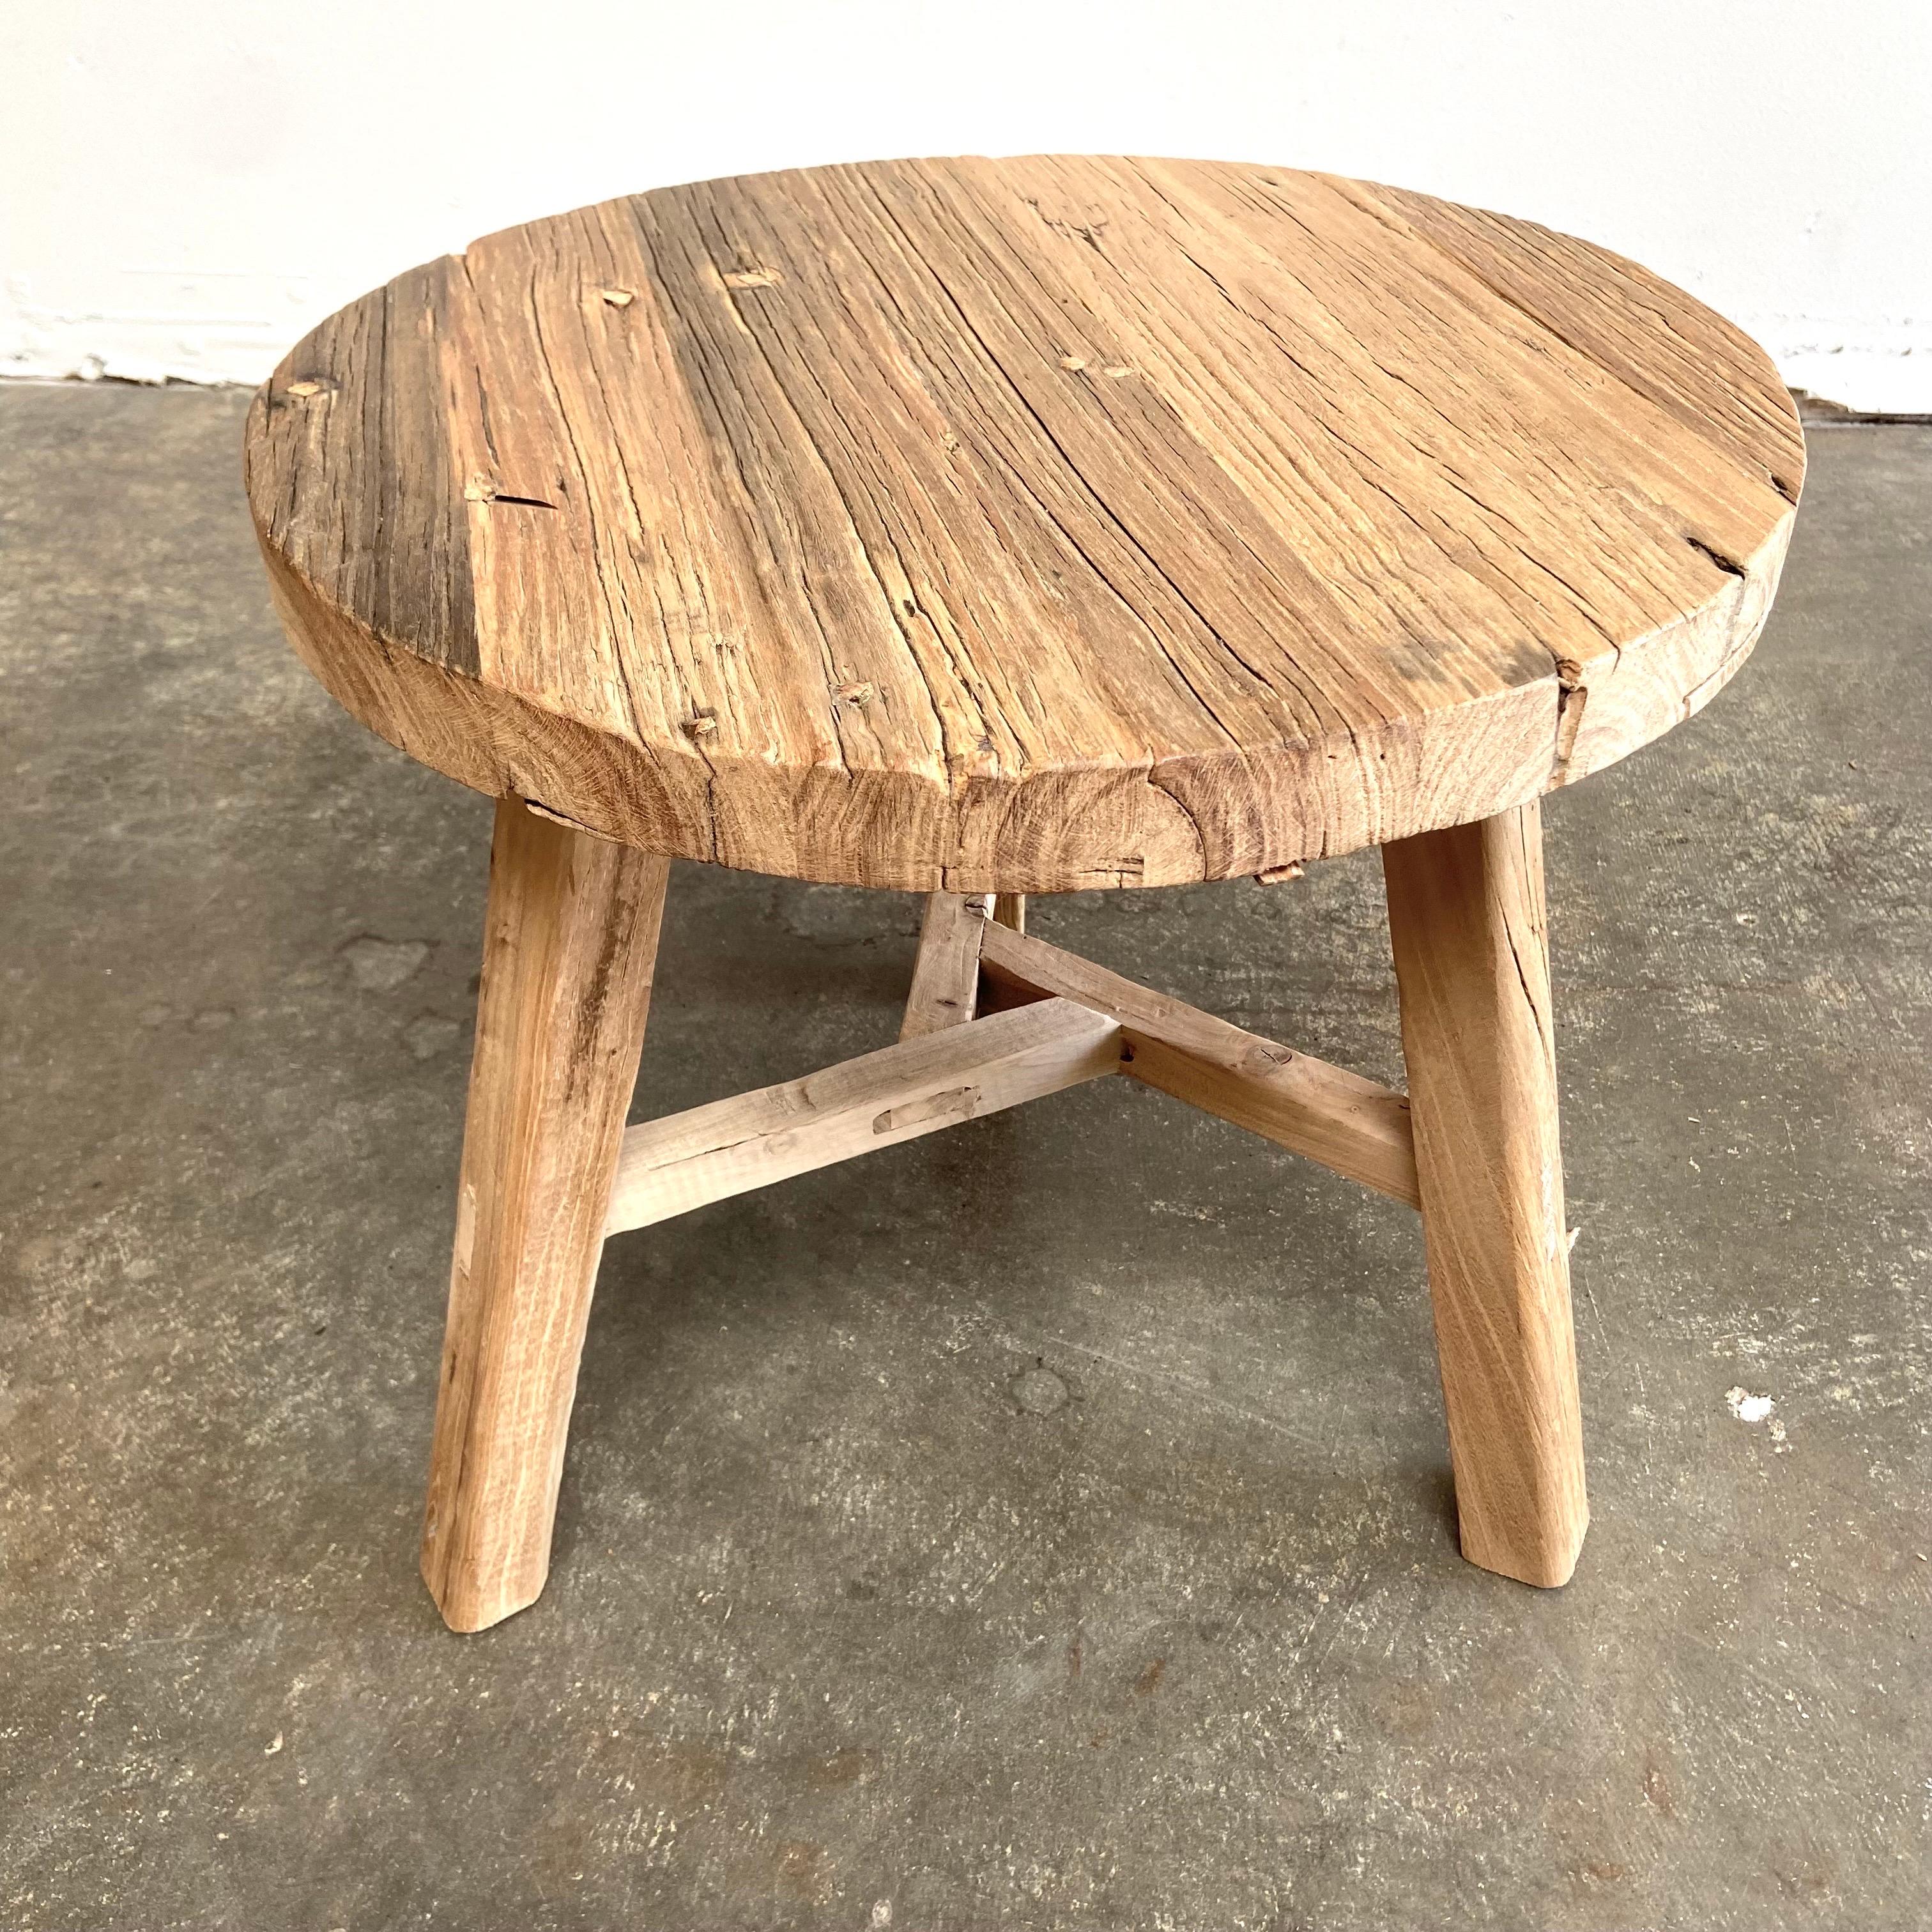 Round Elm wood side table multiple quantities available. Natural raw patina, solid elm wood, made by bloom home inc. Solid and sturdy, great for use next to a sofa, in between chairs, in a bath, or bedside.

Elm side table 20” rd. X 19”h